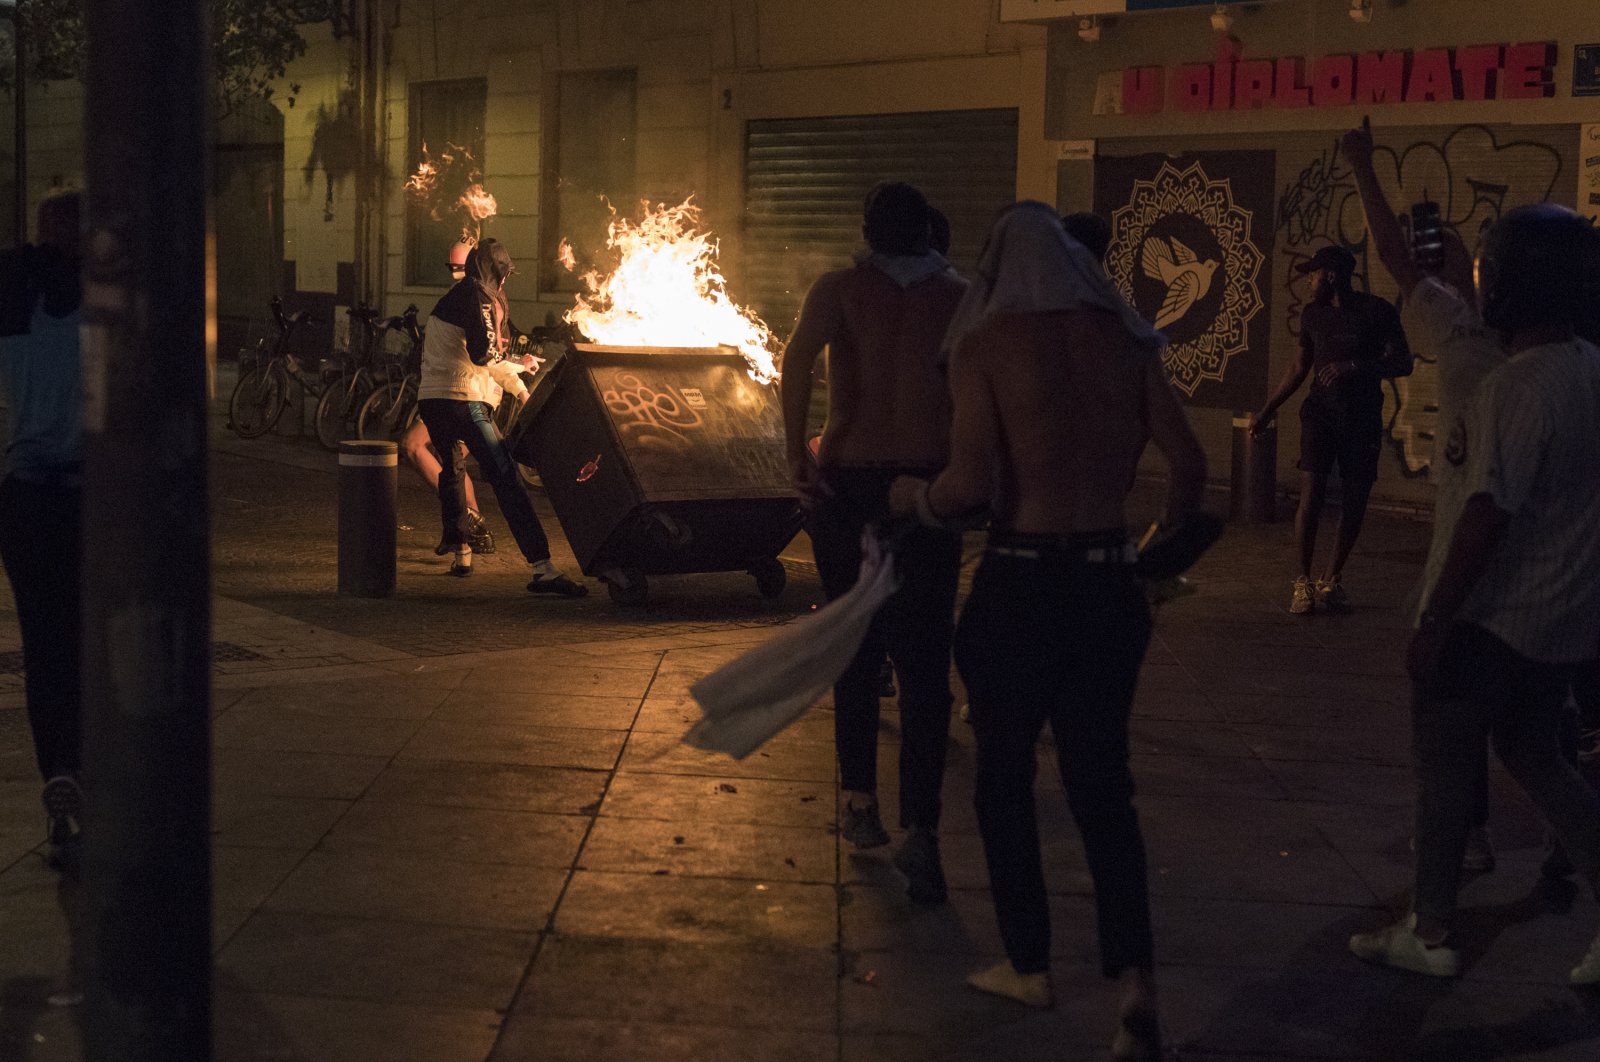 Fans hurl a burning container at police during violent riots reacting to Bayern Munich's victory in a Champions League final soccer match with Paris Saint-Germain, in Marseille, southern France, Aug. 23, 2020. (AP Photo)